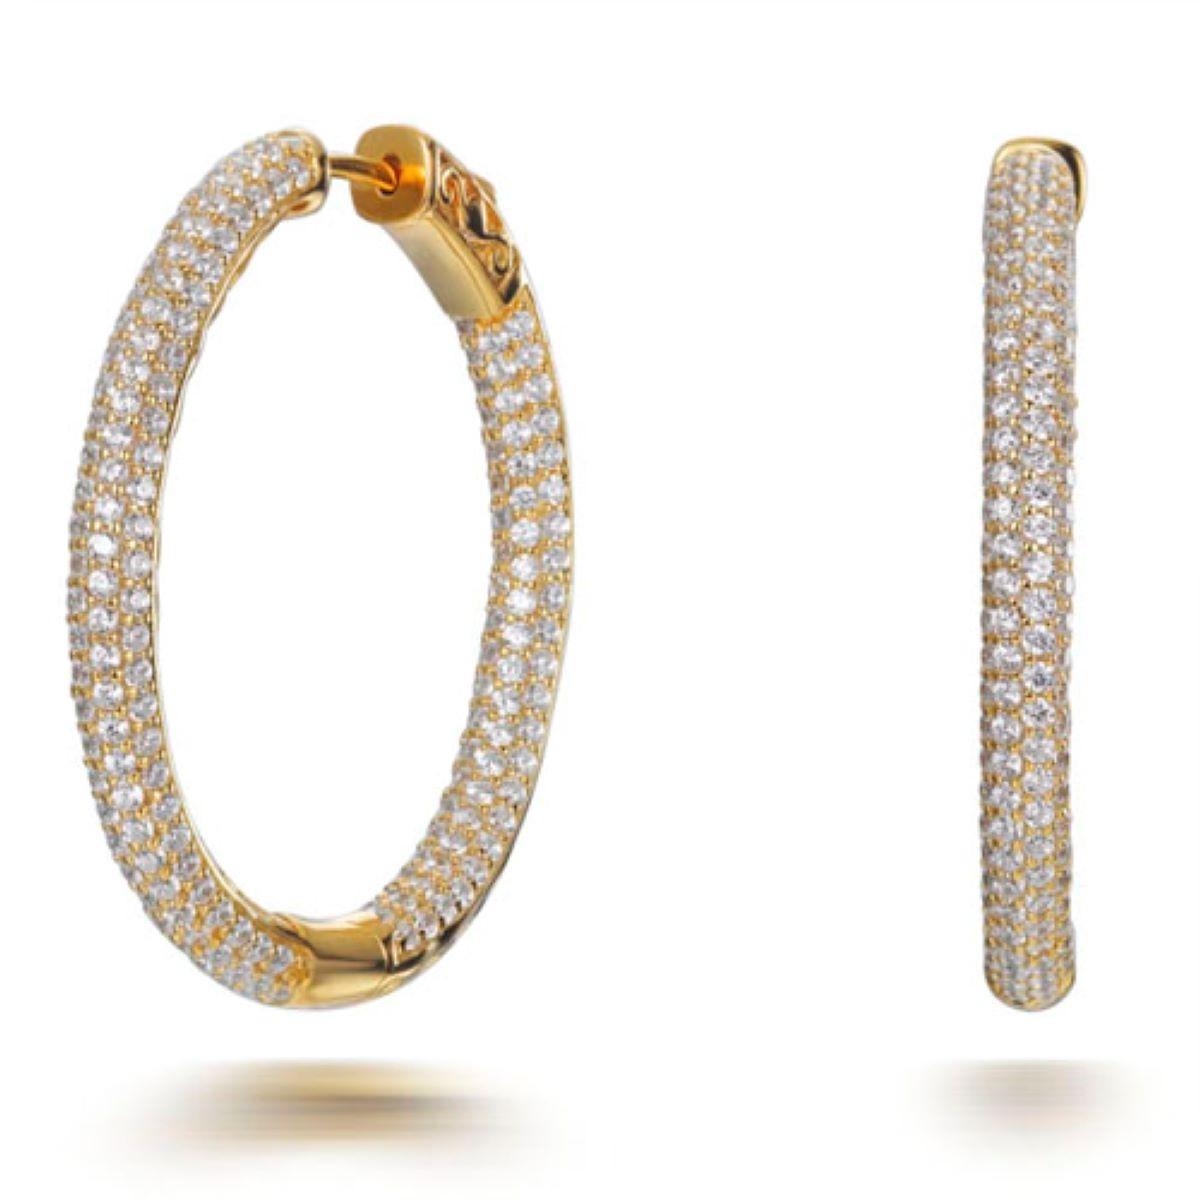 A twist on the wardrobe staple, these shimmering hoop earrings will add a sparkling statement to any occasion.

Featuring 7.86ct of round brilliant cut cubic zirconia, set in 925 sterling silver with a 14kt yellow gold finish.

Dimensions 35mm drop